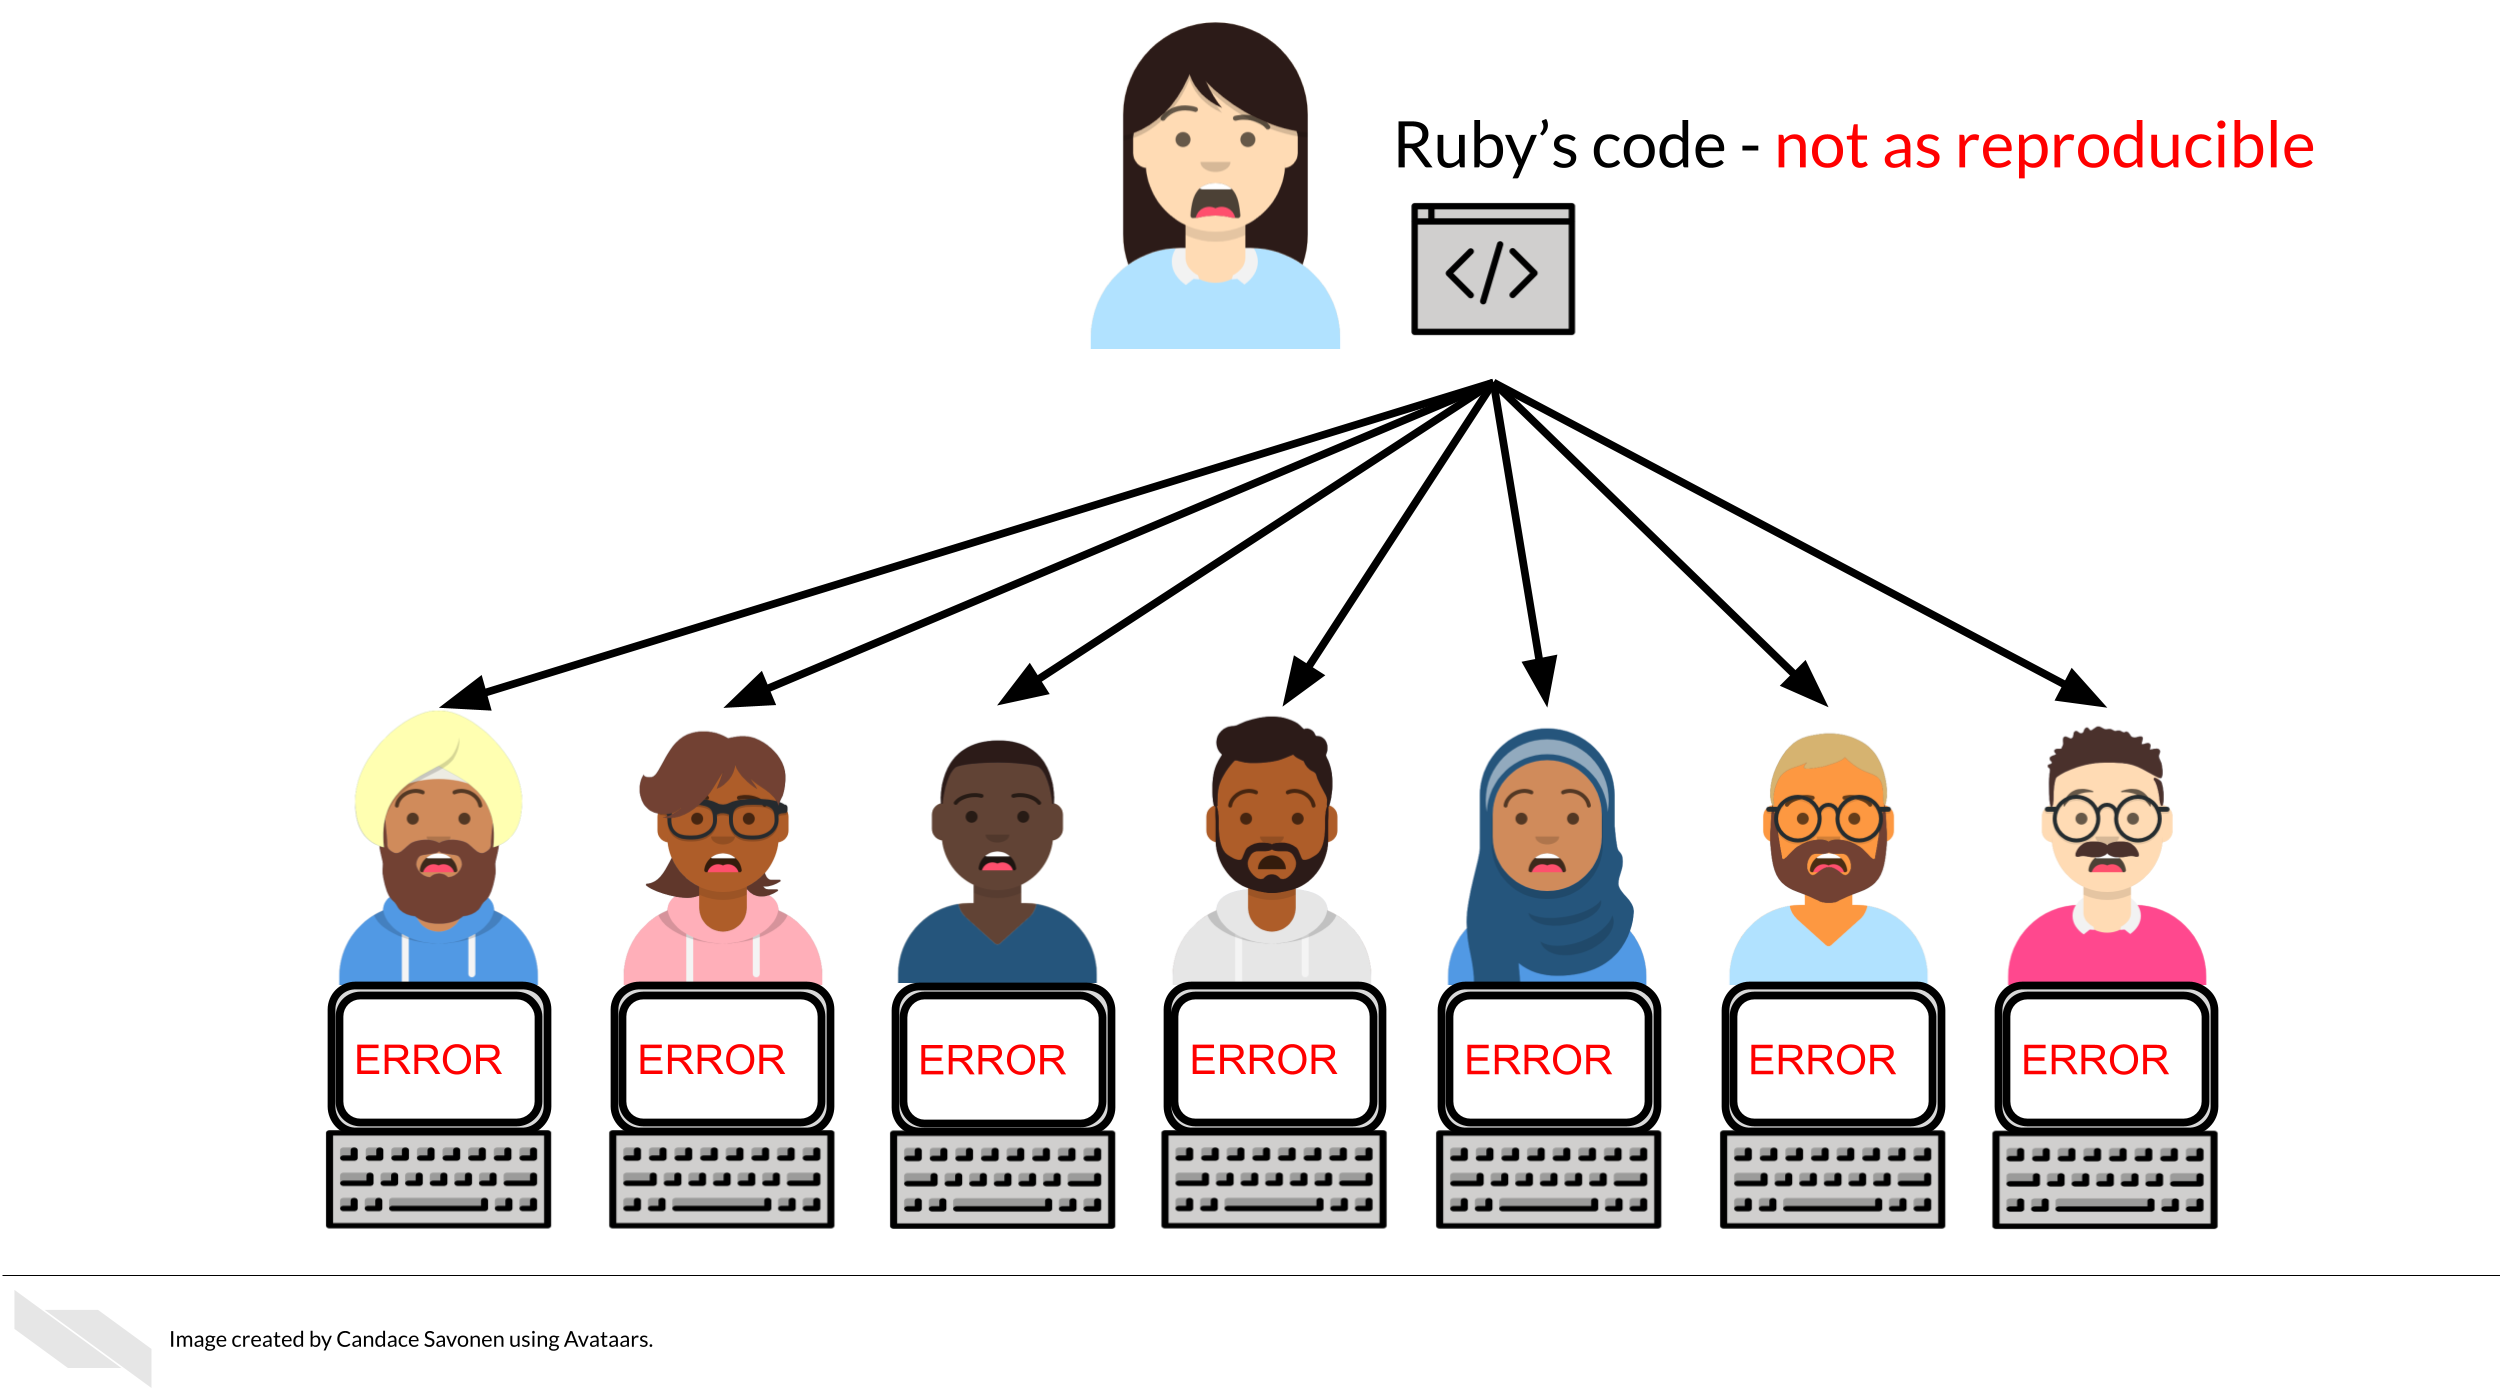 If Ruby’s code is less reproducible, every researcher who attempts to use Ruby’s code will encounter the same errors and each person will have to fix it. This adds up to a lot of spent researcher time and effort.